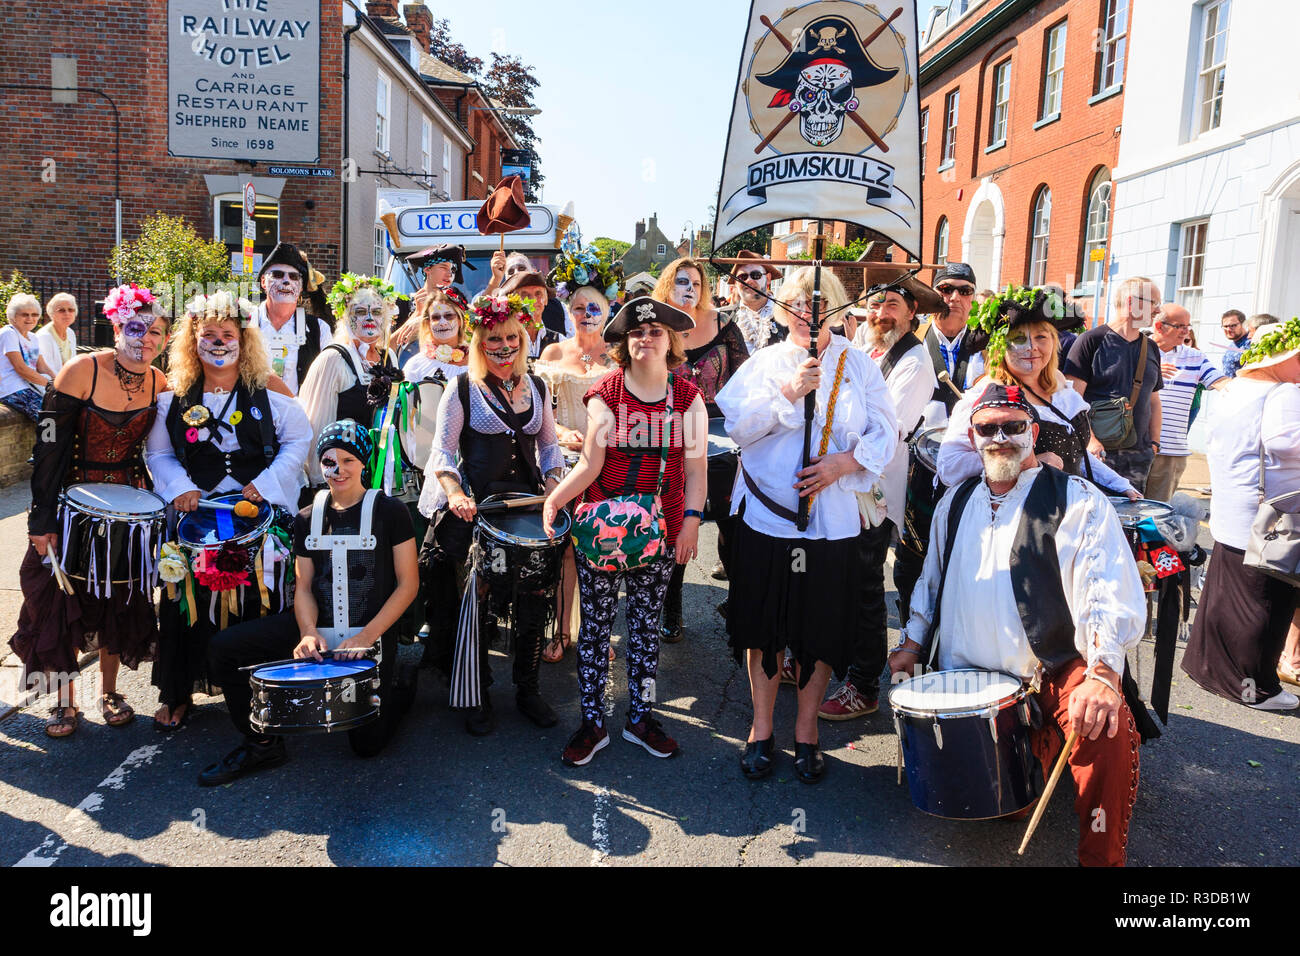 Faversham hop festival. Group shot of the Drumskulls drummers group. Smiling posing, one holds group banner, most faces painted horror pirate style. Stock Photo